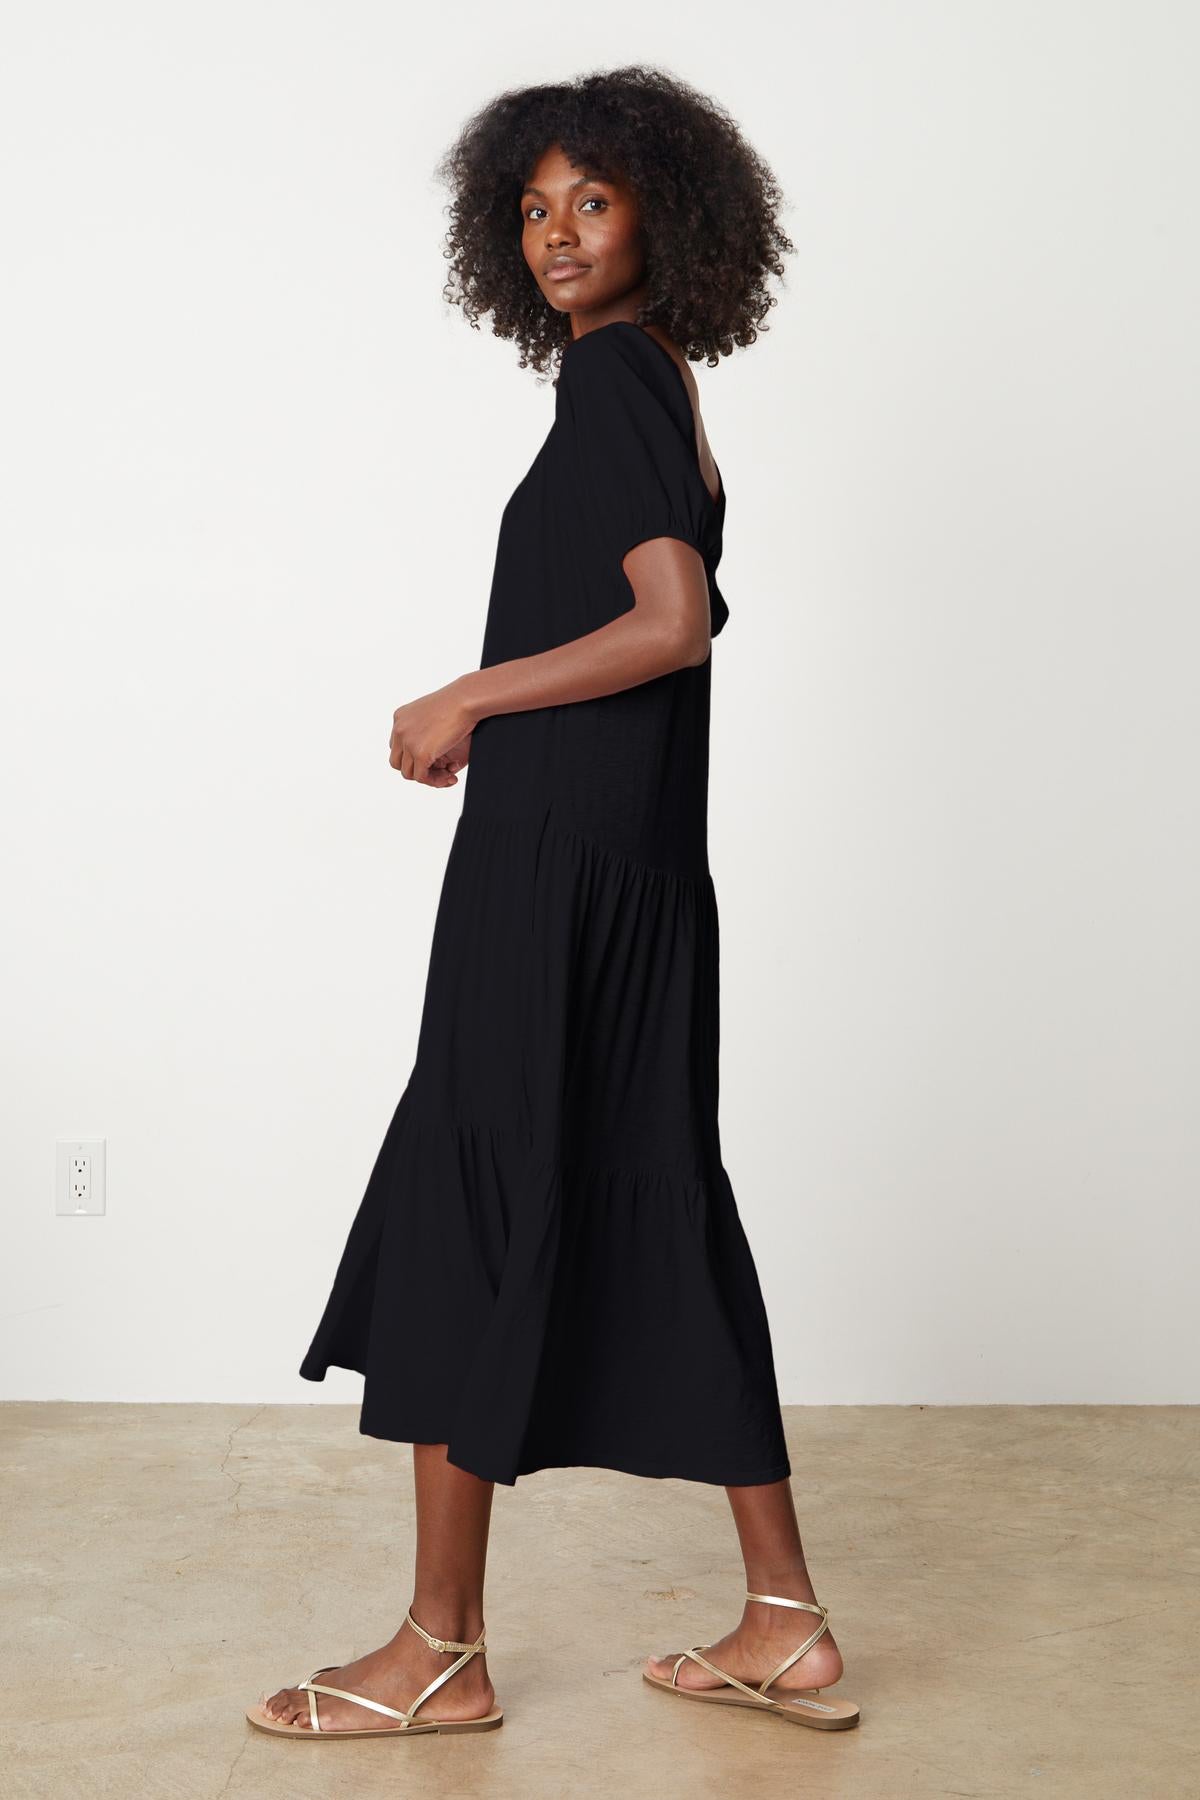   The model is wearing a black JANE SCOOP NECK TIERED DRESS by Velvet by Graham & Spencer and sandals. 